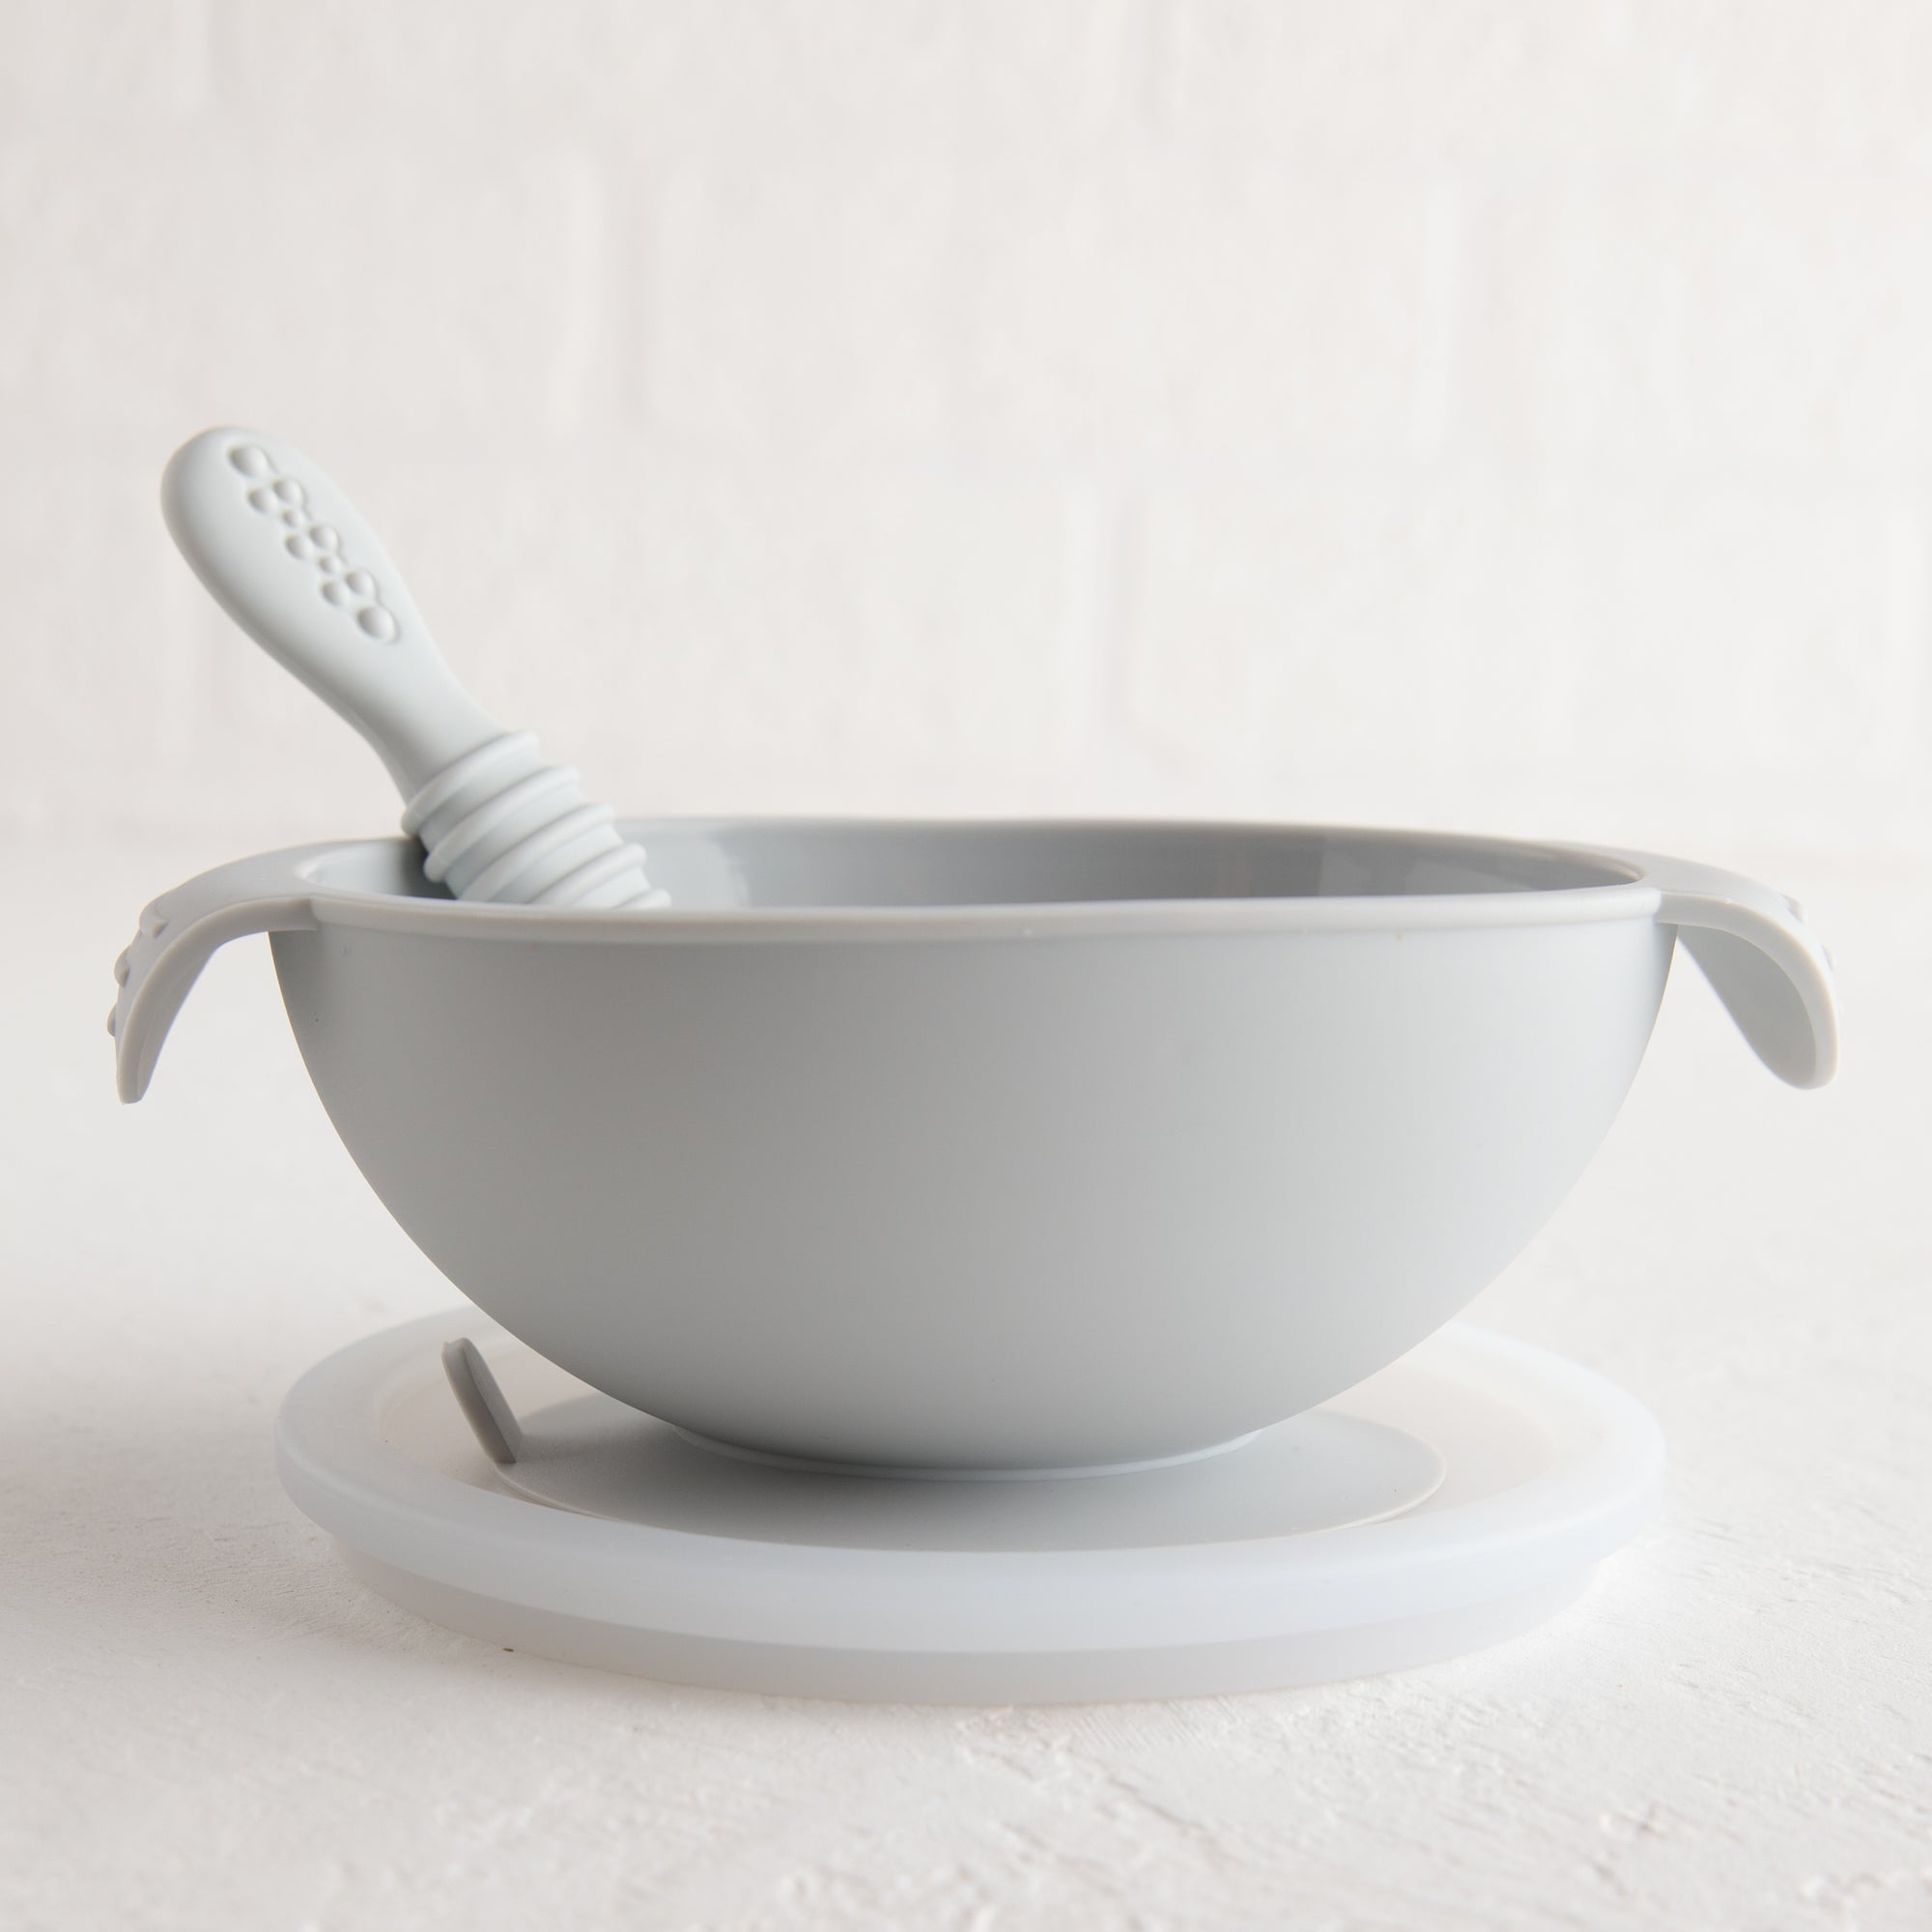 baby bowl - suction bowl - Silicone Suction Bowl and Spoon Set - Nestor Avenue